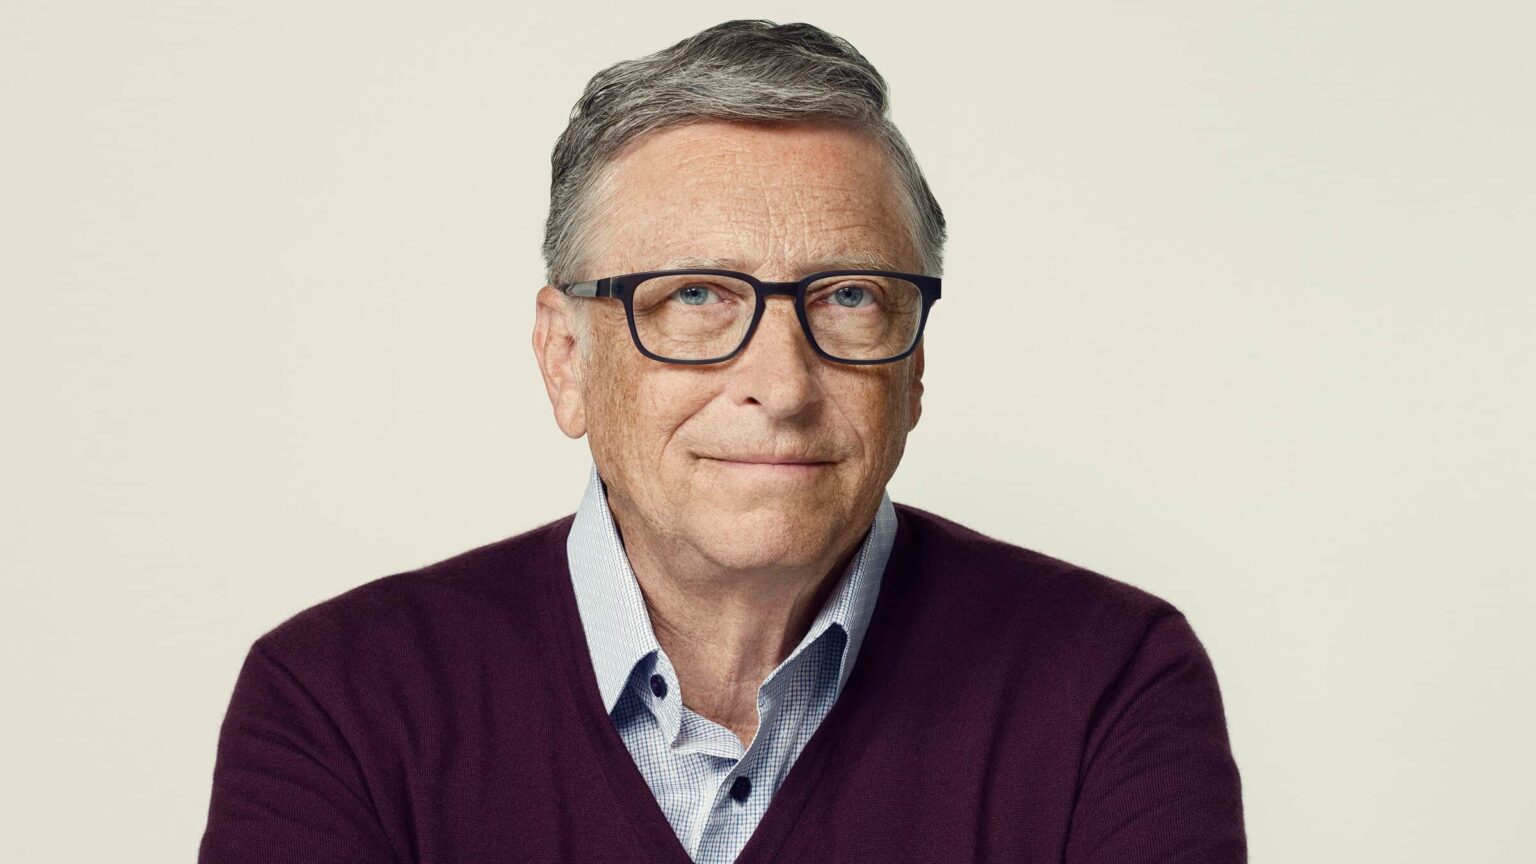 How much is Bill Gates worth? We all know he's one of the richest people in the world but will his divorce impact his wealth? Find out here!